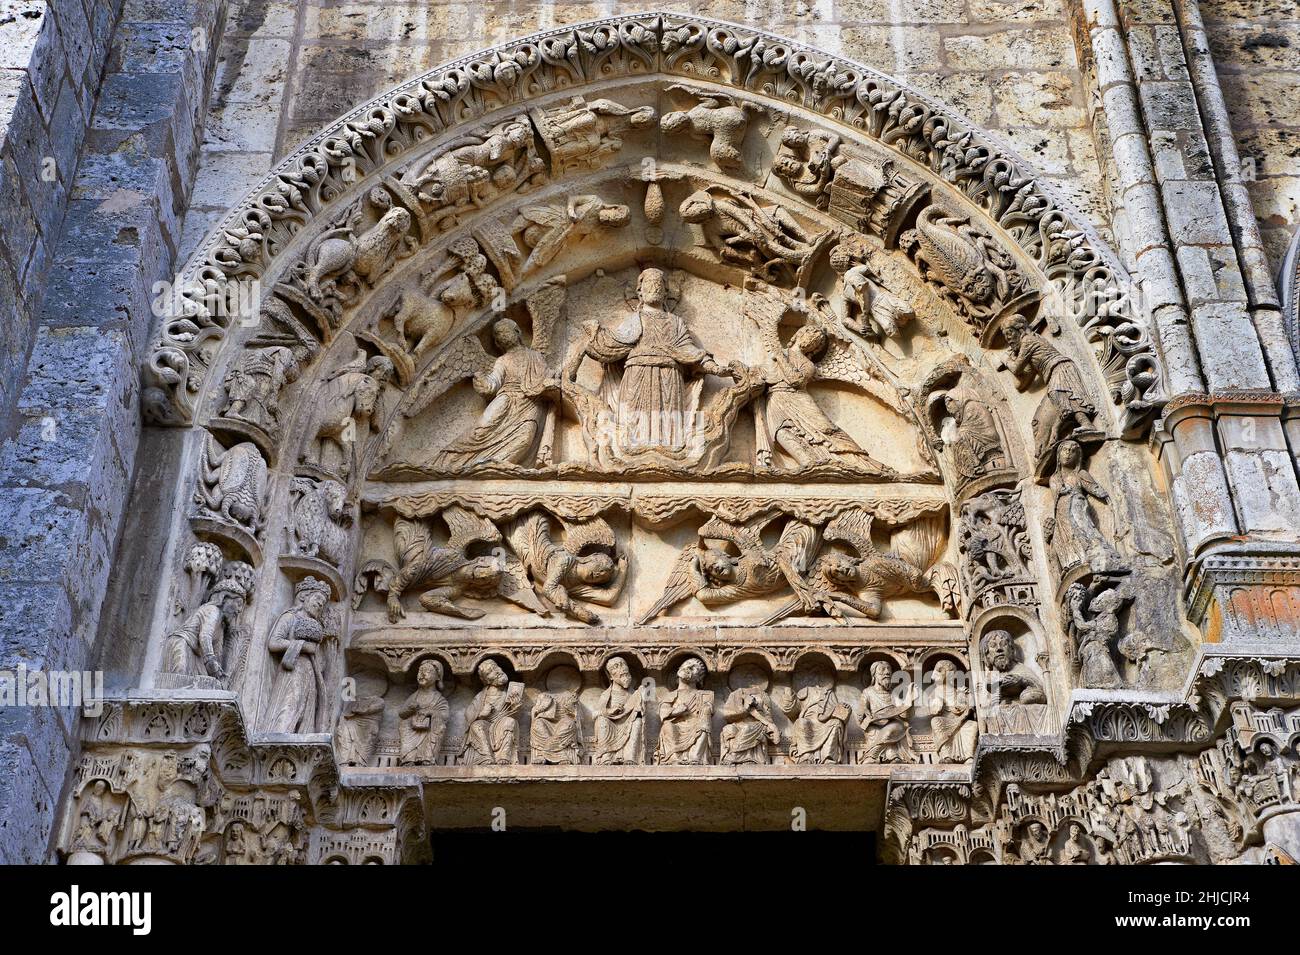 West Facade, Left Portal - General View of Tympanum c. 1145. Cathedral of Chartres, France . The tympanum of the left door shows the Ascension or the Stock Photo